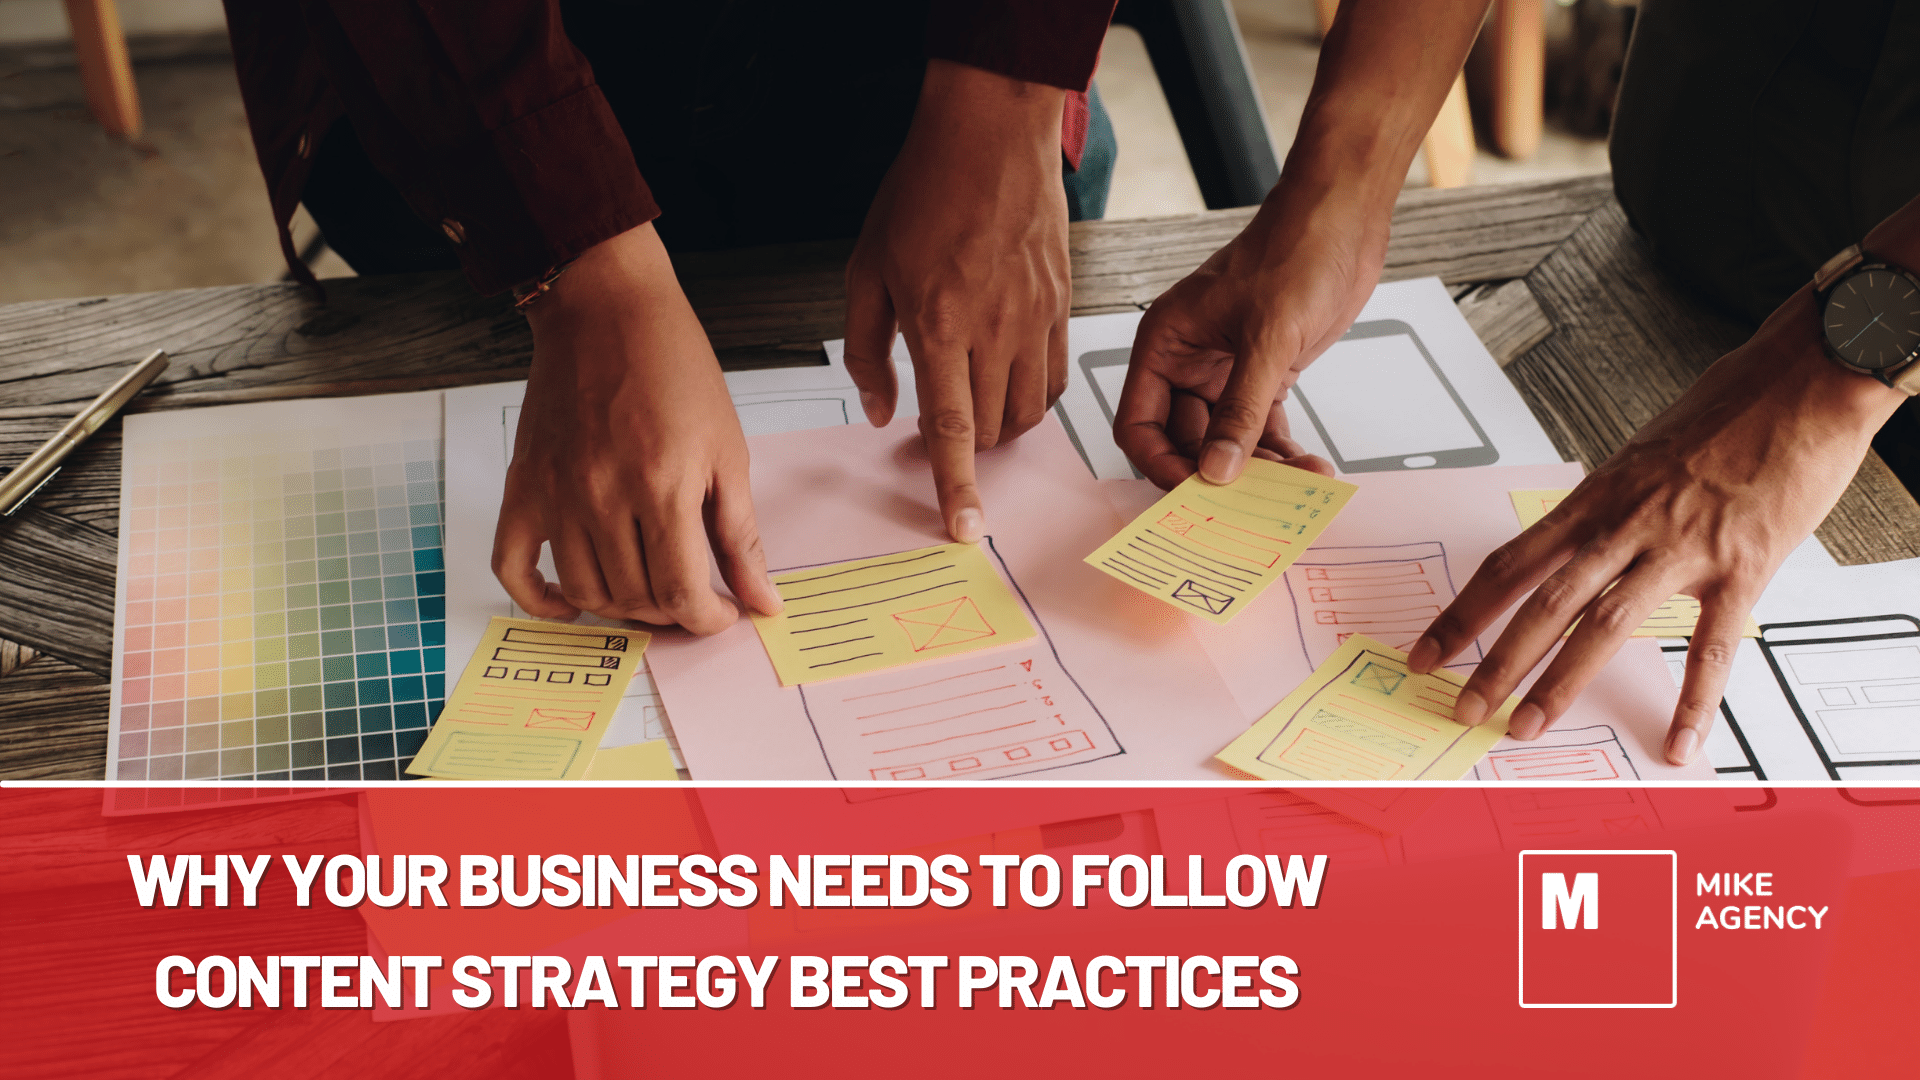 Why your business needs to follow content strategy best practices